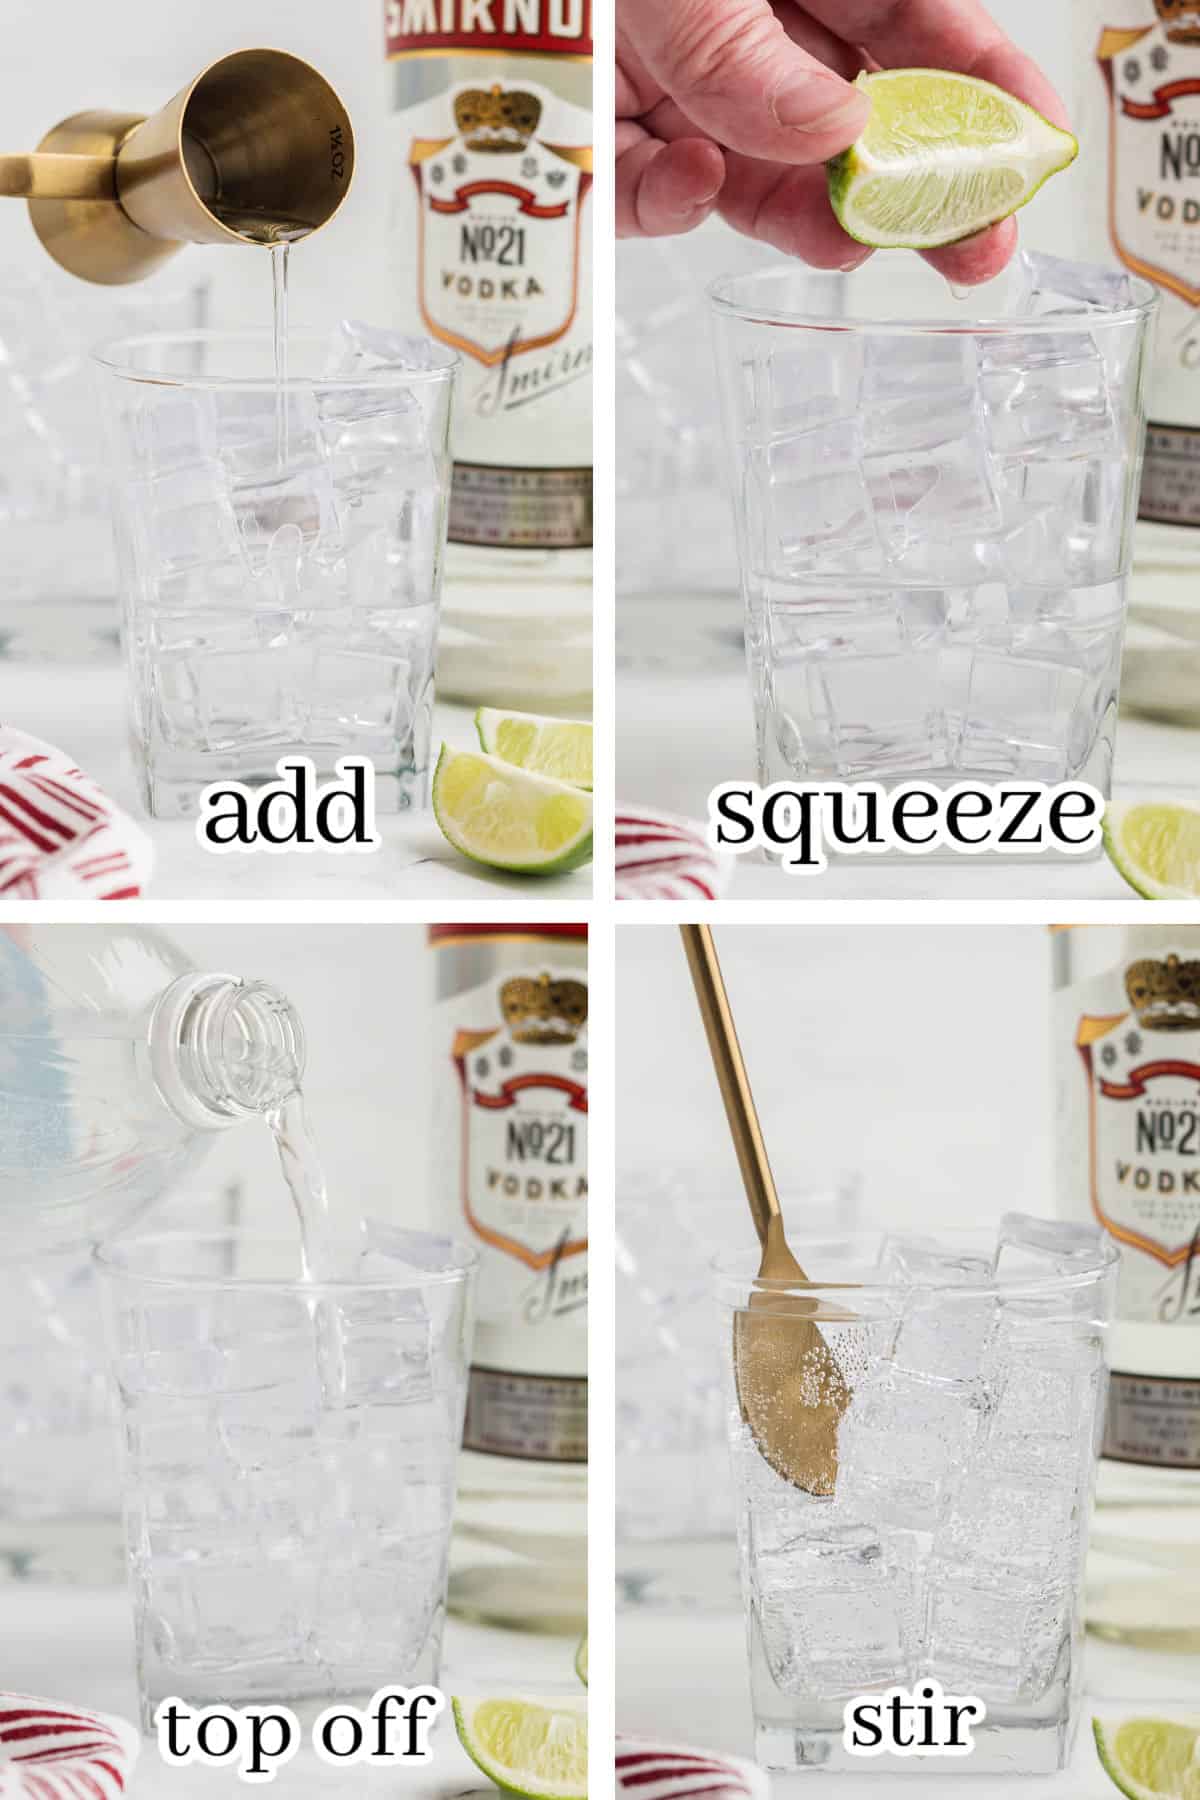 Step-by-step instructions to make the drink recipe, with print overlay for clarification.